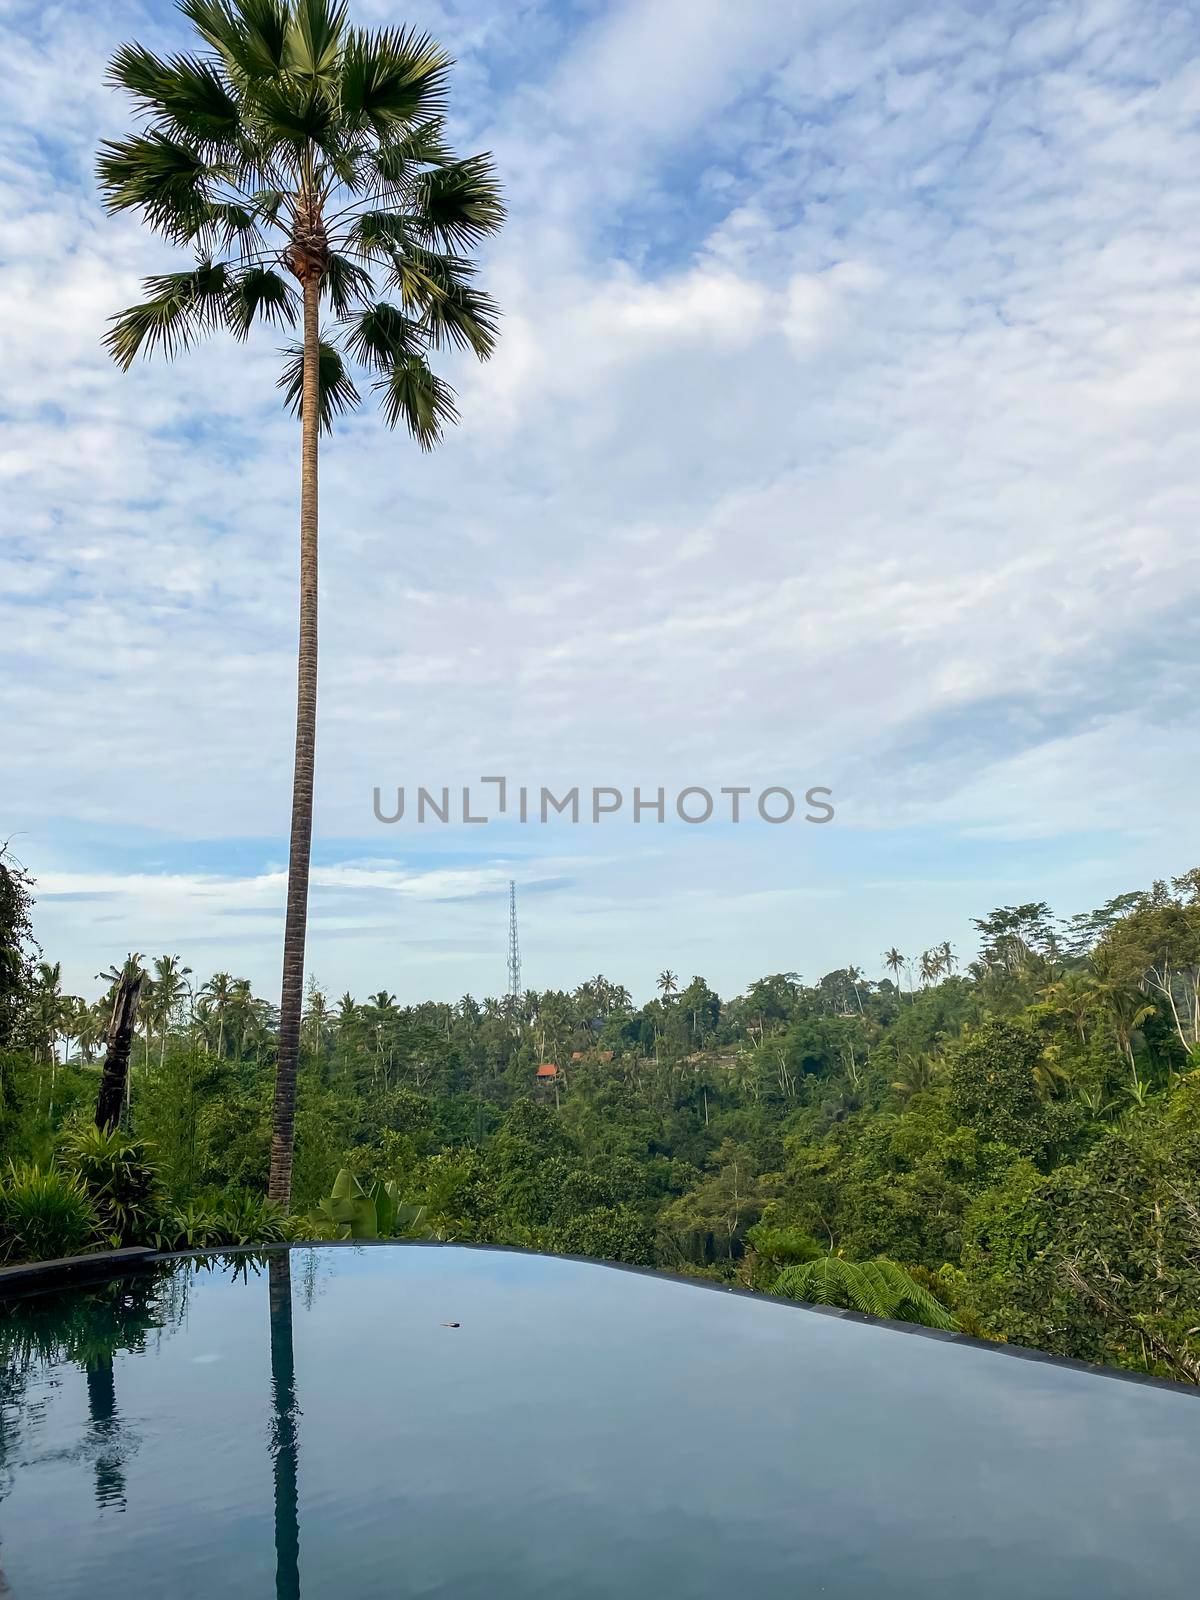 Infinity pool in the jungle of Ubud in Bali, Indonesia by kaliaevaen